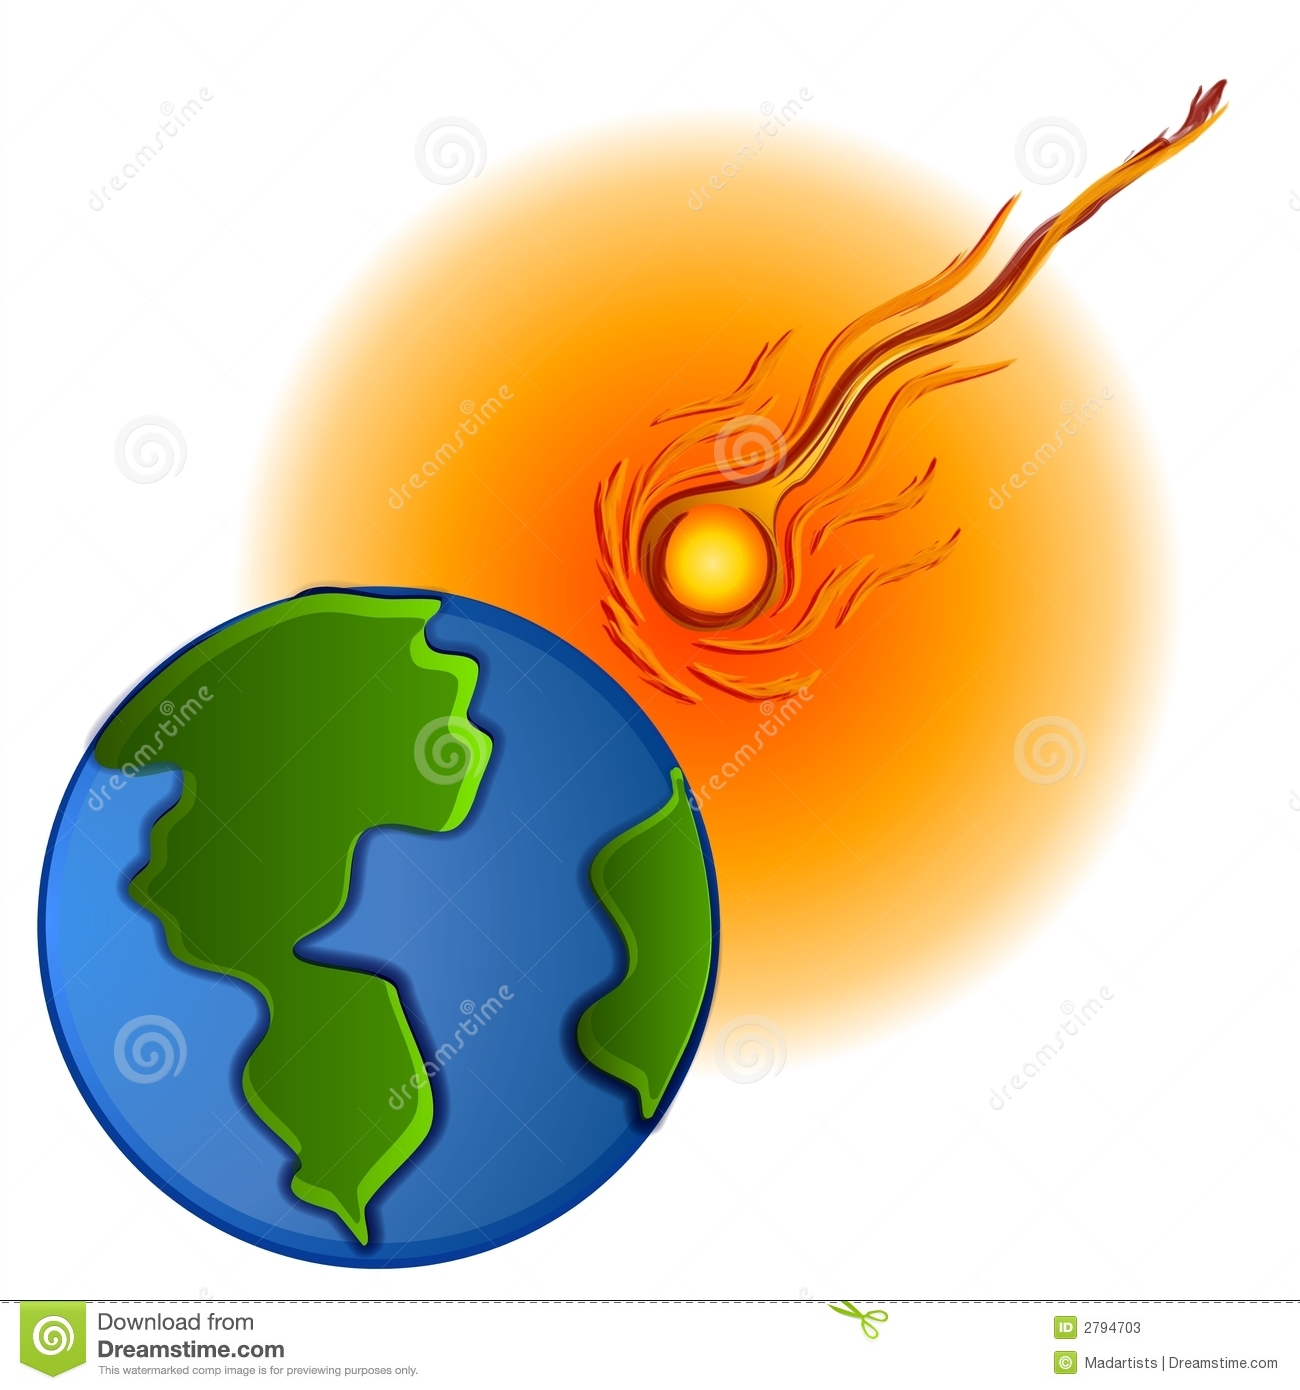 Asteroid Hitting Earth Clipart Stock Photos   Image  2794703